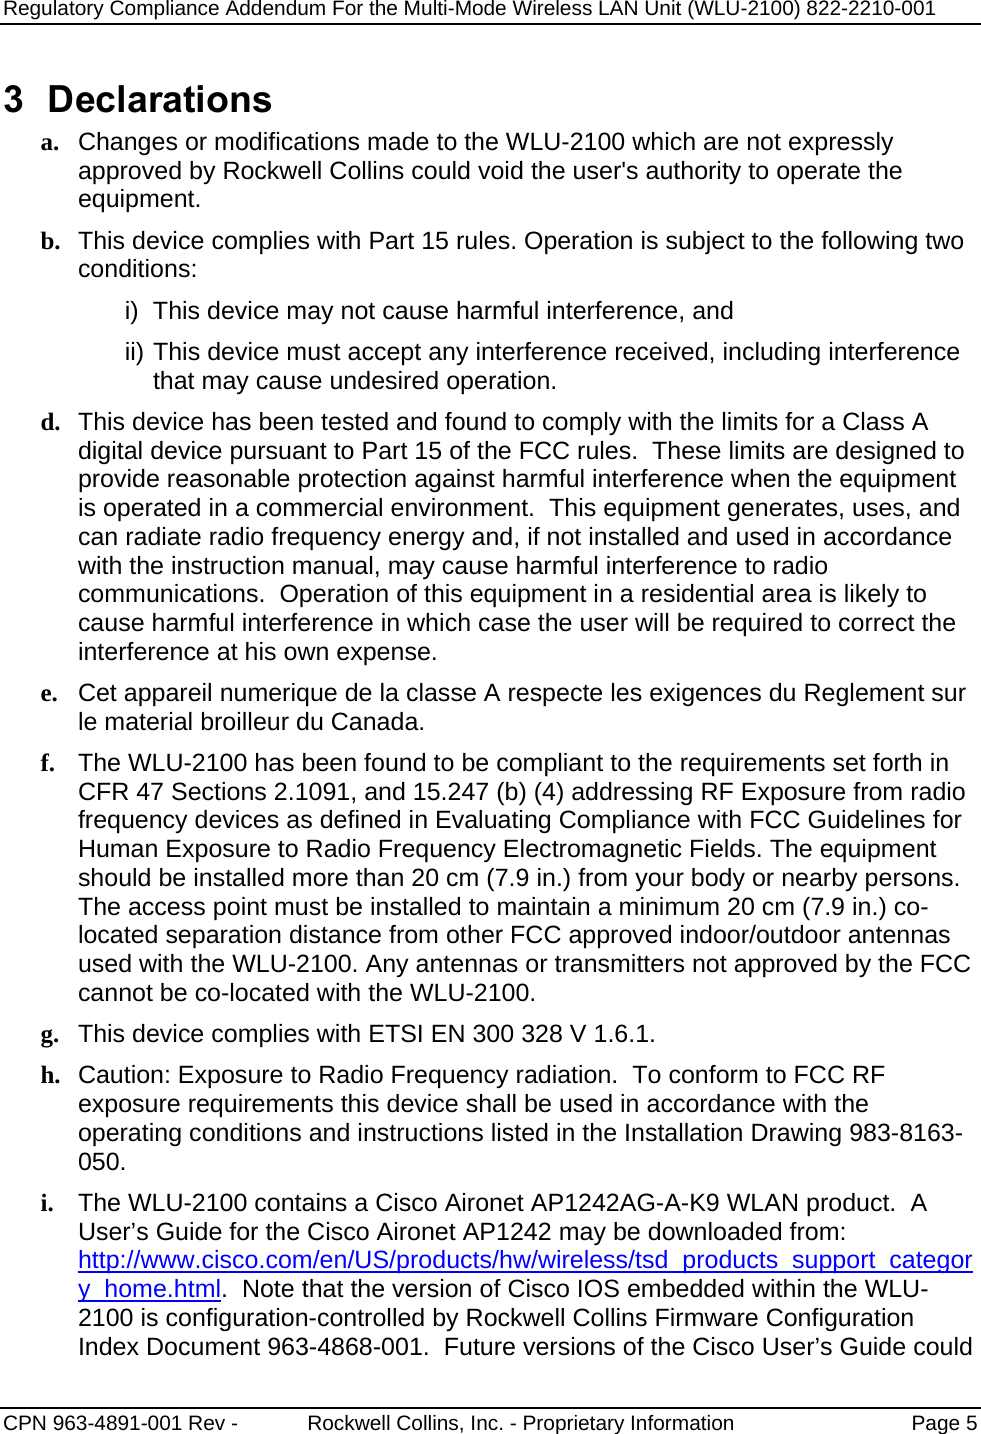 Regulatory Compliance Addendum For the Multi-Mode Wireless LAN Unit (WLU-2100) 822-2210-001   CPN 963-4891-001 Rev -            Rockwell Collins, Inc. - Proprietary Information  Page 5  3 Declarations a. Changes or modifications made to the WLU-2100 which are not expressly approved by Rockwell Collins could void the user&apos;s authority to operate the equipment.   b. This device complies with Part 15 rules. Operation is subject to the following two conditions: i)  This device may not cause harmful interference, and ii) This device must accept any interference received, including interference that may cause undesired operation. d. This device has been tested and found to comply with the limits for a Class A digital device pursuant to Part 15 of the FCC rules.  These limits are designed to provide reasonable protection against harmful interference when the equipment is operated in a commercial environment.  This equipment generates, uses, and can radiate radio frequency energy and, if not installed and used in accordance with the instruction manual, may cause harmful interference to radio communications.  Operation of this equipment in a residential area is likely to cause harmful interference in which case the user will be required to correct the interference at his own expense. e. Cet appareil numerique de la classe A respecte les exigences du Reglement sur le material broilleur du Canada. f. The WLU-2100 has been found to be compliant to the requirements set forth in CFR 47 Sections 2.1091, and 15.247 (b) (4) addressing RF Exposure from radio frequency devices as defined in Evaluating Compliance with FCC Guidelines for Human Exposure to Radio Frequency Electromagnetic Fields. The equipment should be installed more than 20 cm (7.9 in.) from your body or nearby persons.  The access point must be installed to maintain a minimum 20 cm (7.9 in.) co-located separation distance from other FCC approved indoor/outdoor antennas used with the WLU-2100. Any antennas or transmitters not approved by the FCC cannot be co-located with the WLU-2100. g. This device complies with ETSI EN 300 328 V 1.6.1. h. Caution: Exposure to Radio Frequency radiation.  To conform to FCC RF exposure requirements this device shall be used in accordance with the operating conditions and instructions listed in the Installation Drawing 983-8163-050. i. The WLU-2100 contains a Cisco Aironet AP1242AG-A-K9 WLAN product.  A User’s Guide for the Cisco Aironet AP1242 may be downloaded from: http://www.cisco.com/en/US/products/hw/wireless/tsd_products_support_category_home.html.  Note that the version of Cisco IOS embedded within the WLU-2100 is configuration-controlled by Rockwell Collins Firmware Configuration Index Document 963-4868-001.  Future versions of the Cisco User’s Guide could 